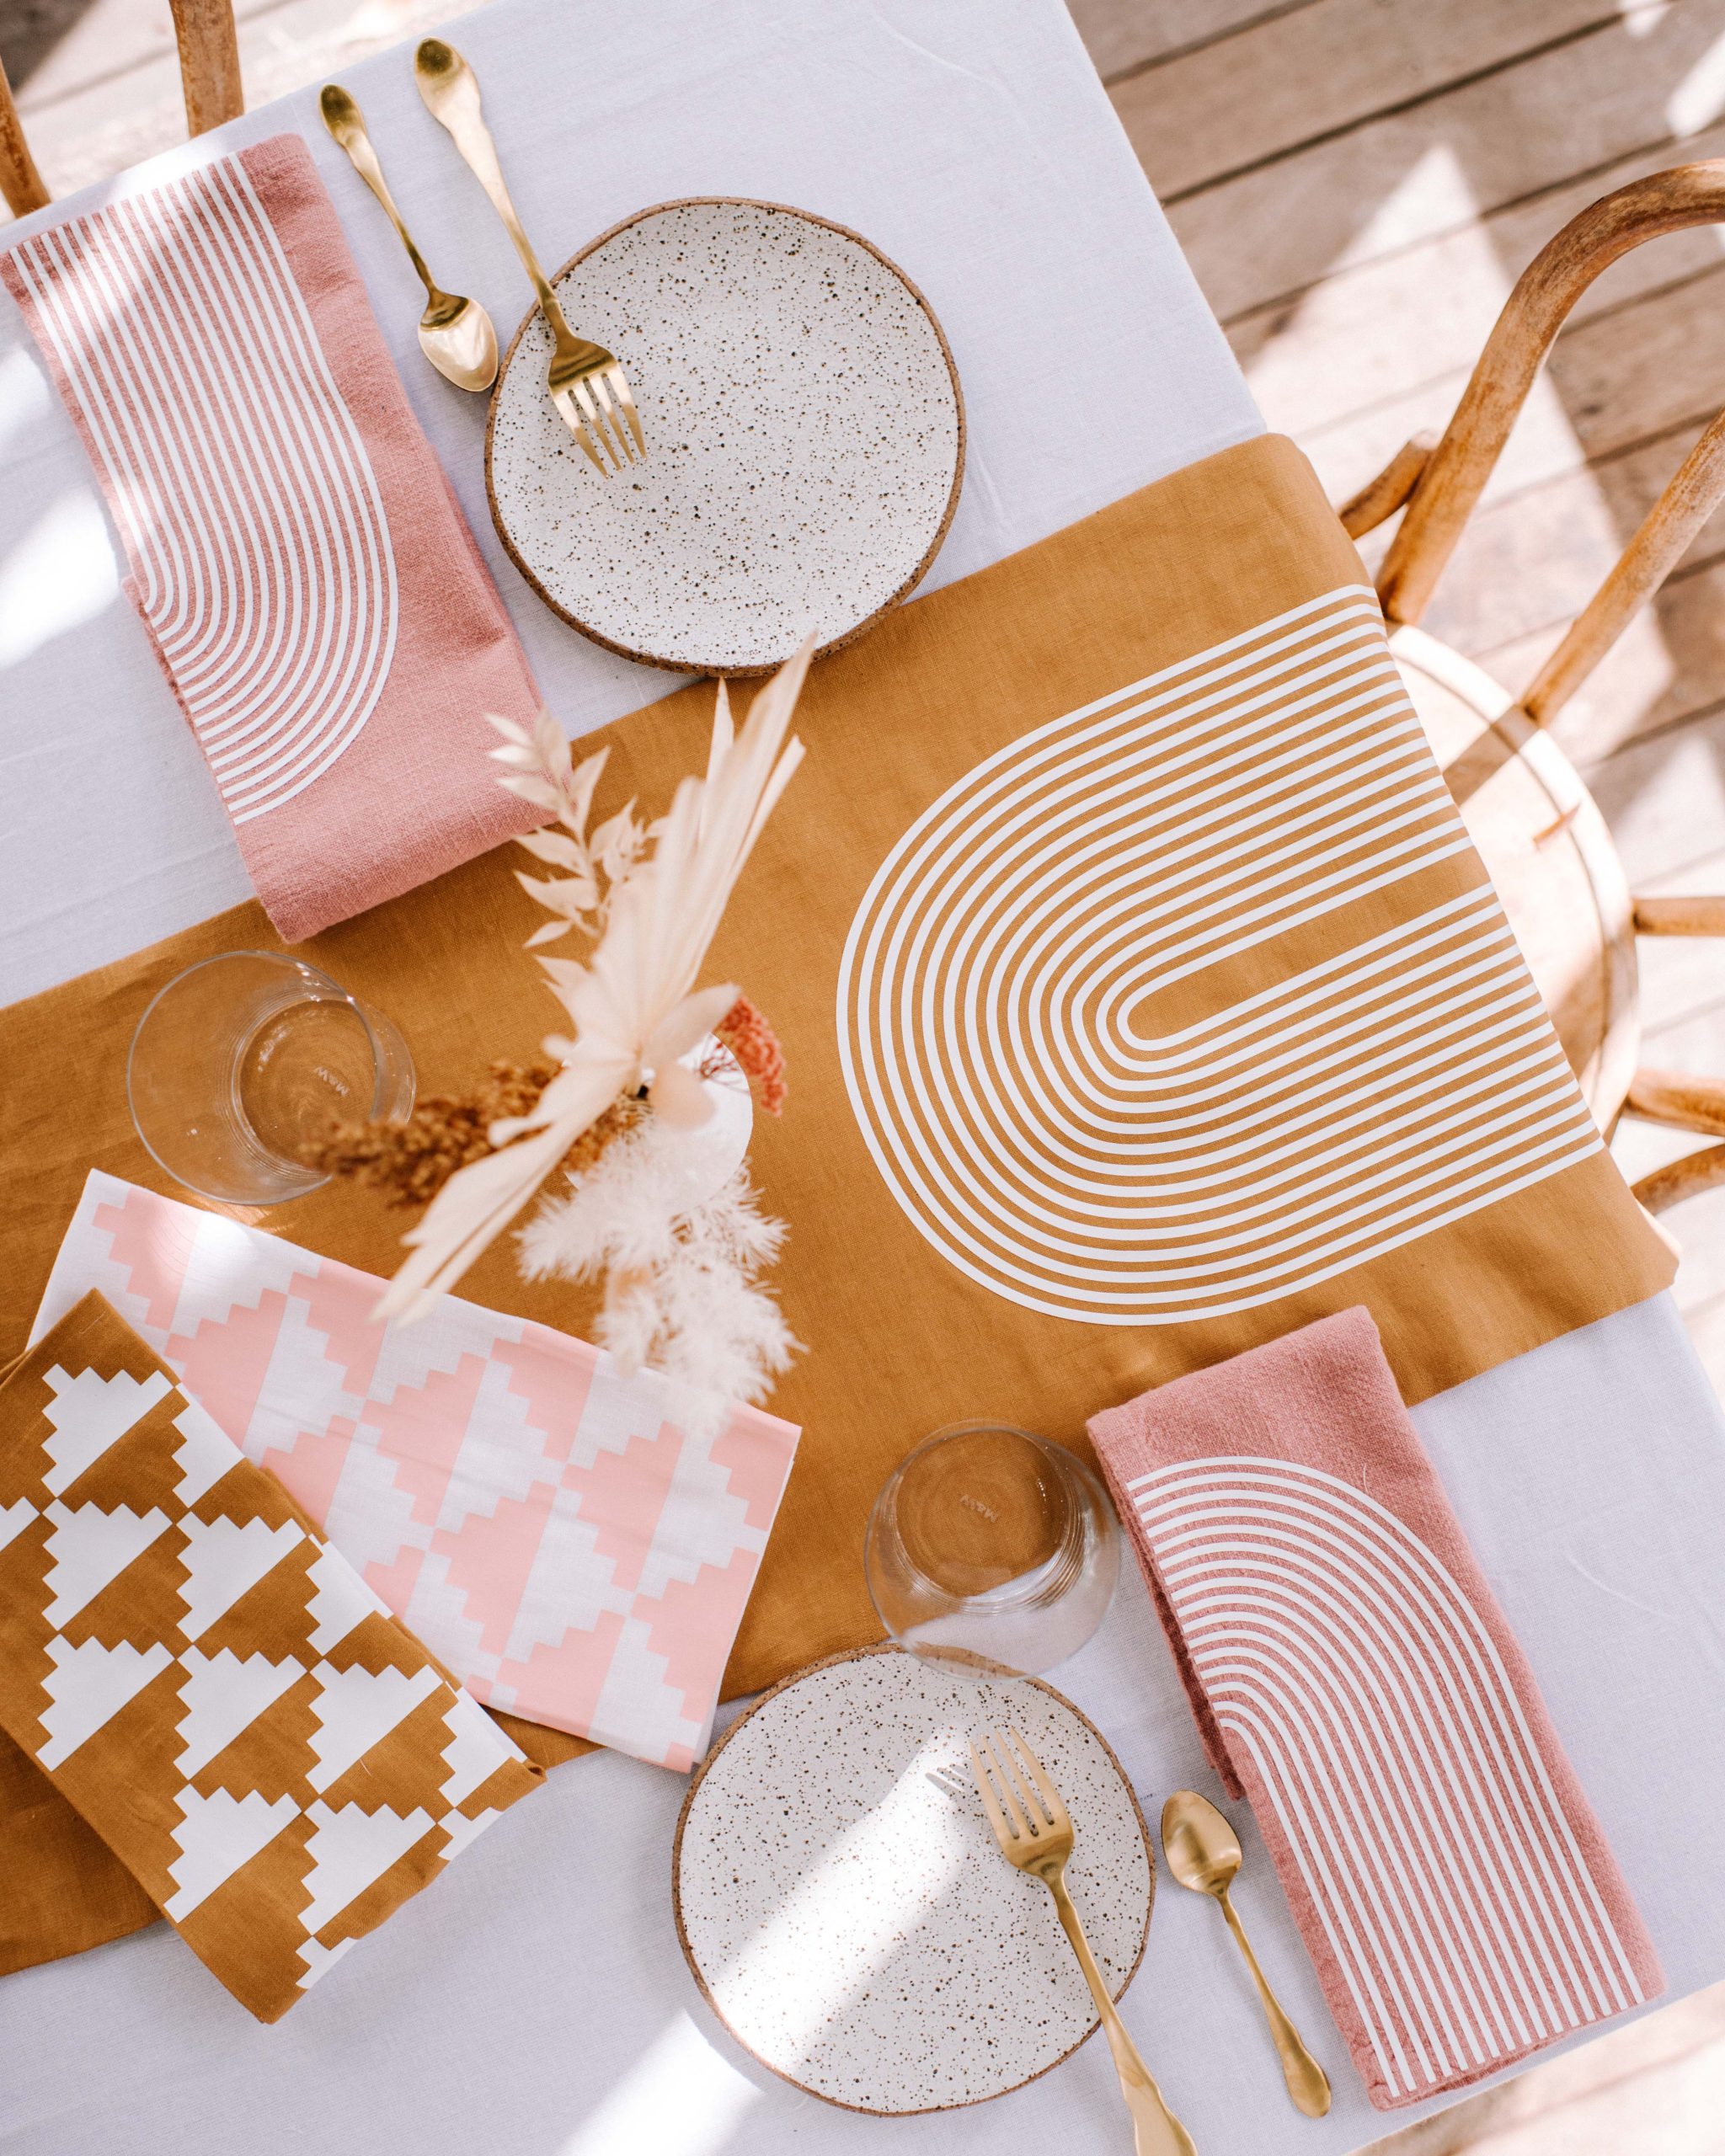 https://collectivegen.com/wp-content/uploads/2021/05/Cricut-Mothers-Day-Table-Linens-16-of-23-scaled.jpg